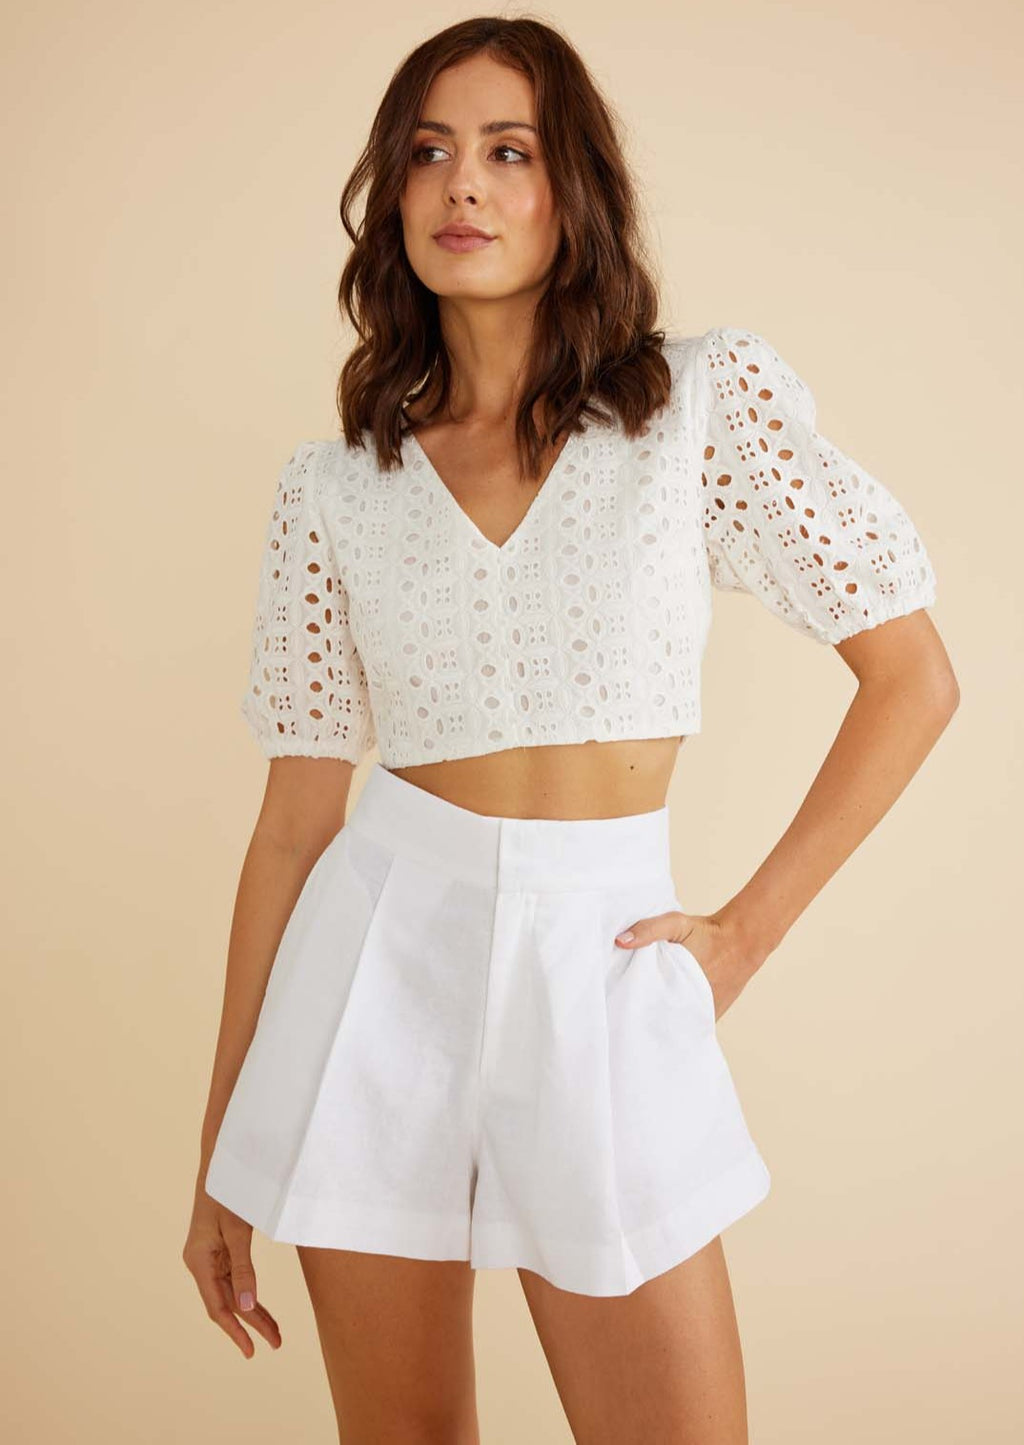 Noa Short - White, by MinkPink The Noa Short is the perfect summer basic. Featuring front pleats and a flat waistband, these shorts are both versatile and elevated. Pair with the Amina Wrap Blouse.  - Front pleats - Flat thick waistband - Pockets - Concealed fly front